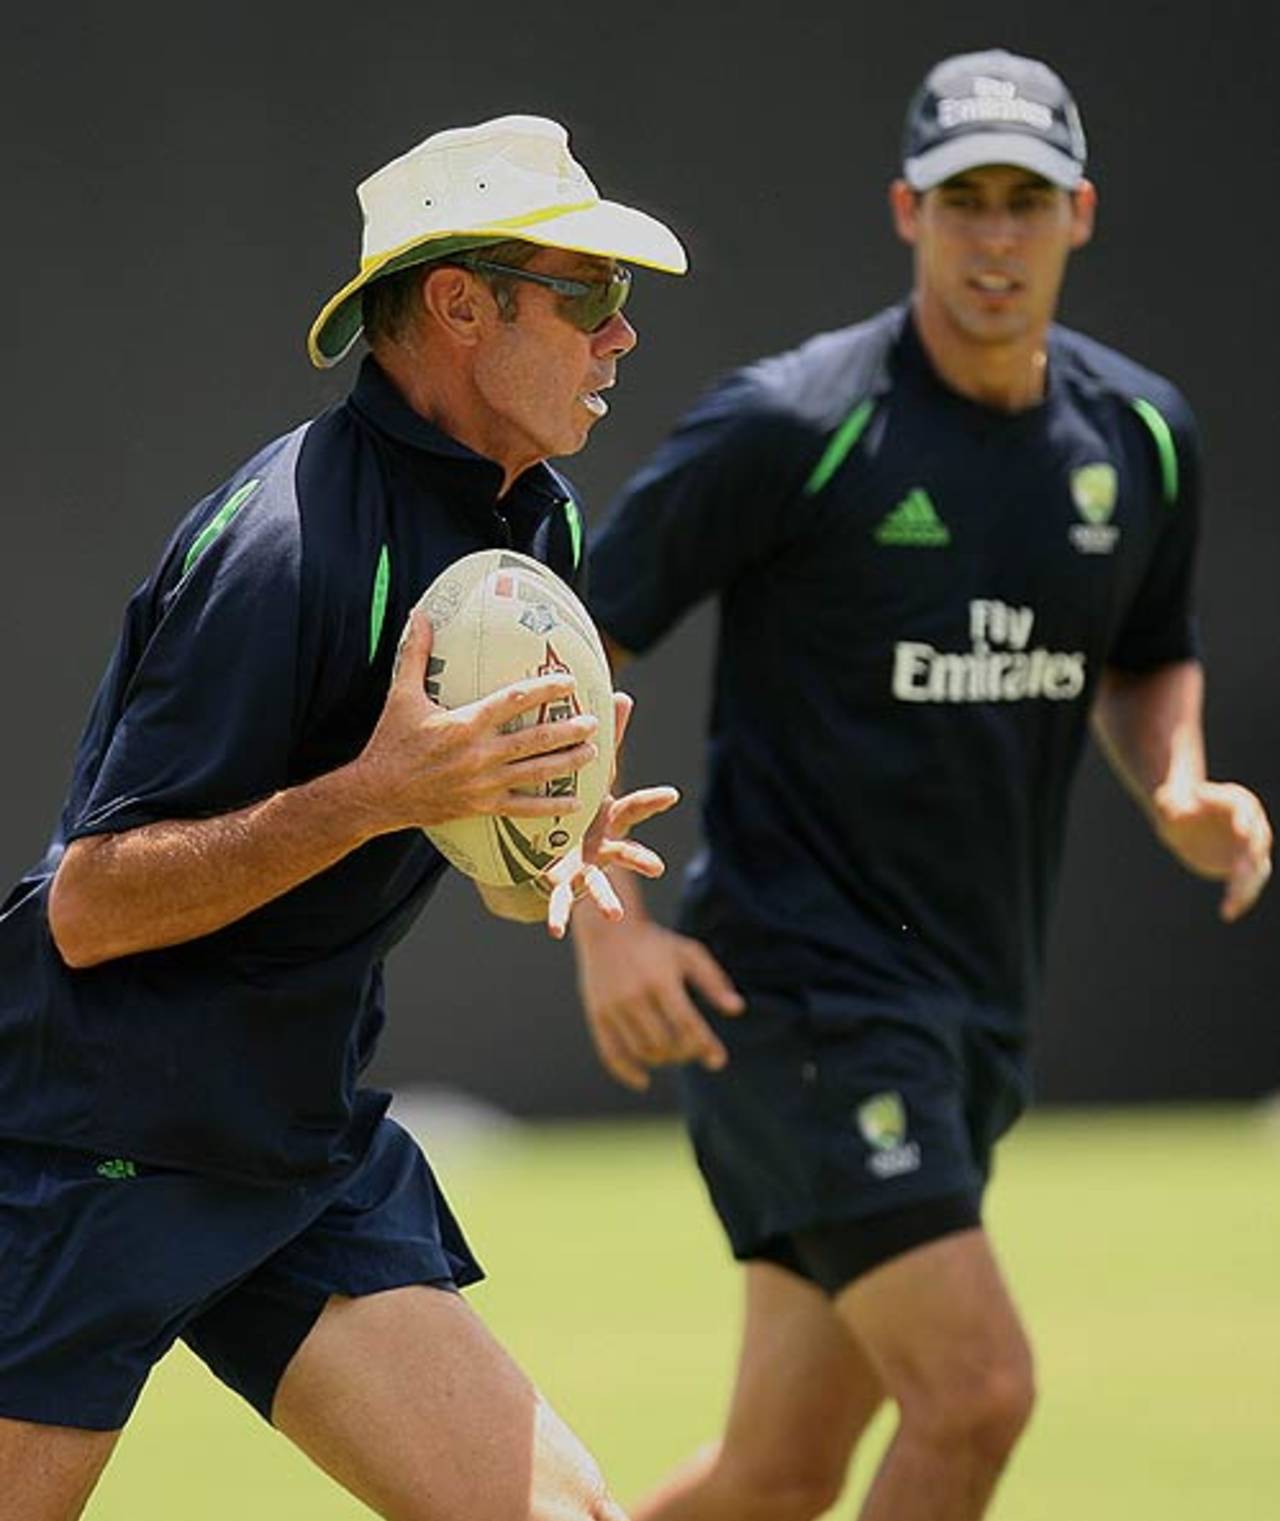 John Buchanan joins the Australian team in a game of touch rugby, Antigua, April 6, 2007